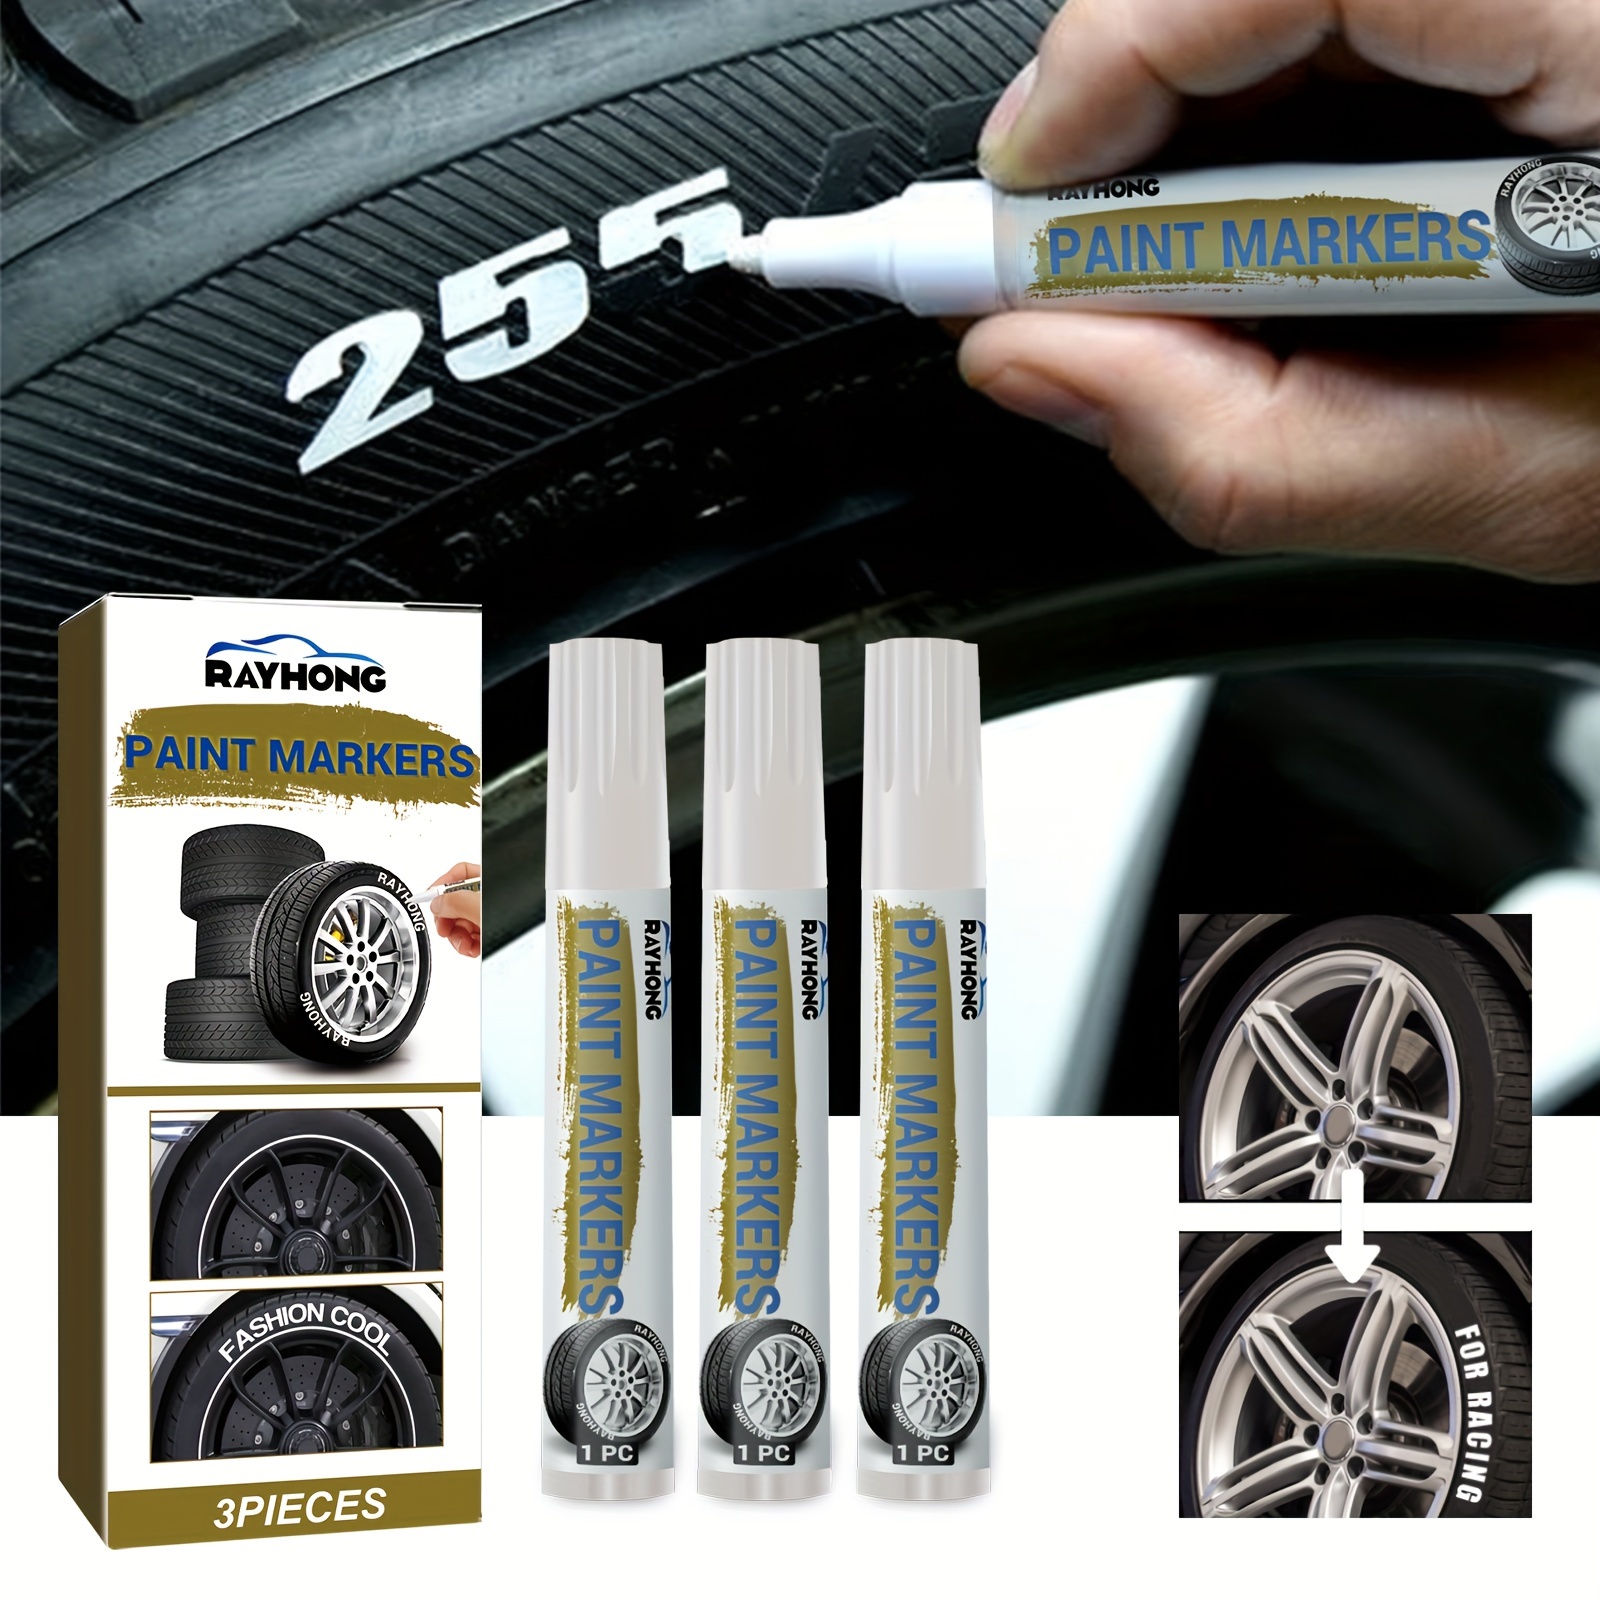 

Premium Waterproof Tire Marker Pen - Fast Drying, Non-smudging - Ideal For Marking Car Tires